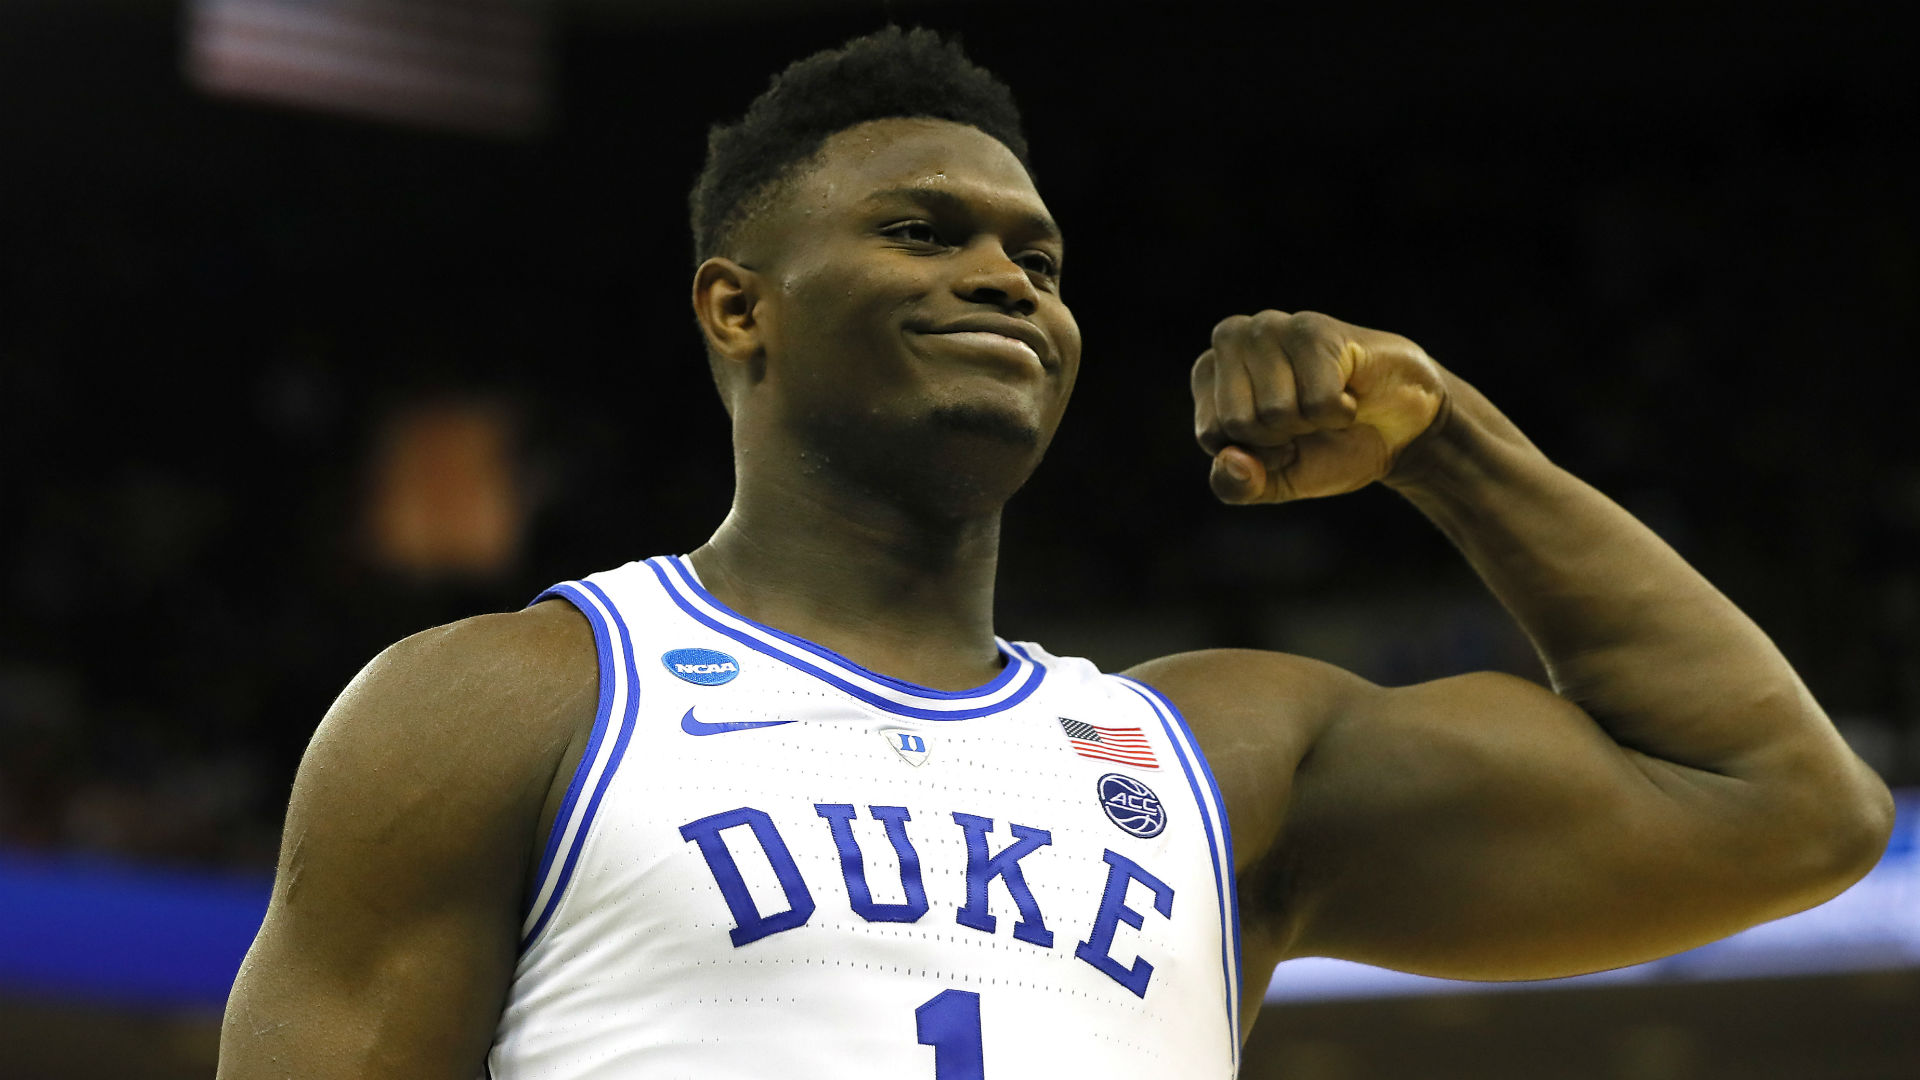 NBA Draft 2019: What are the best player comparisons for Zion Williamson? | NBA.com ...